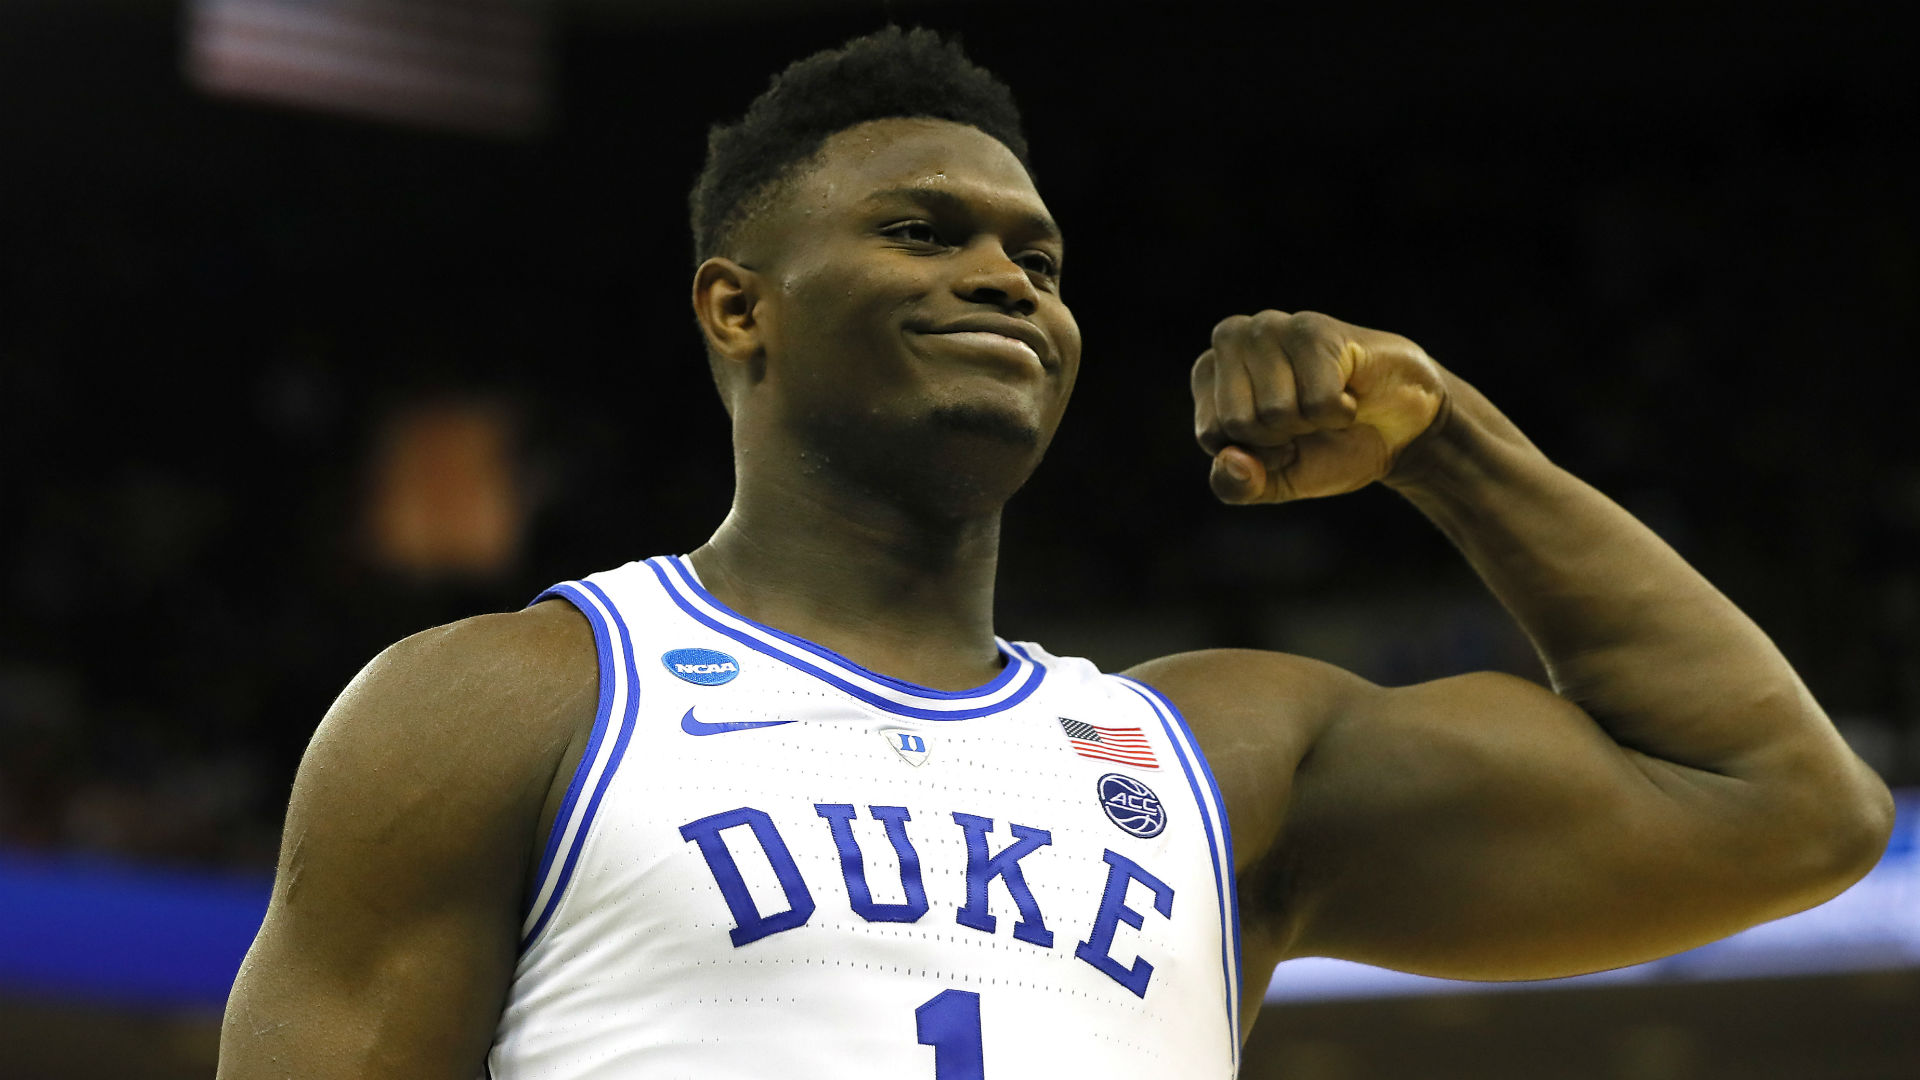 NBA Draft 2019: What are the best player comparisons for Zion Williamson? | NBA.com ...